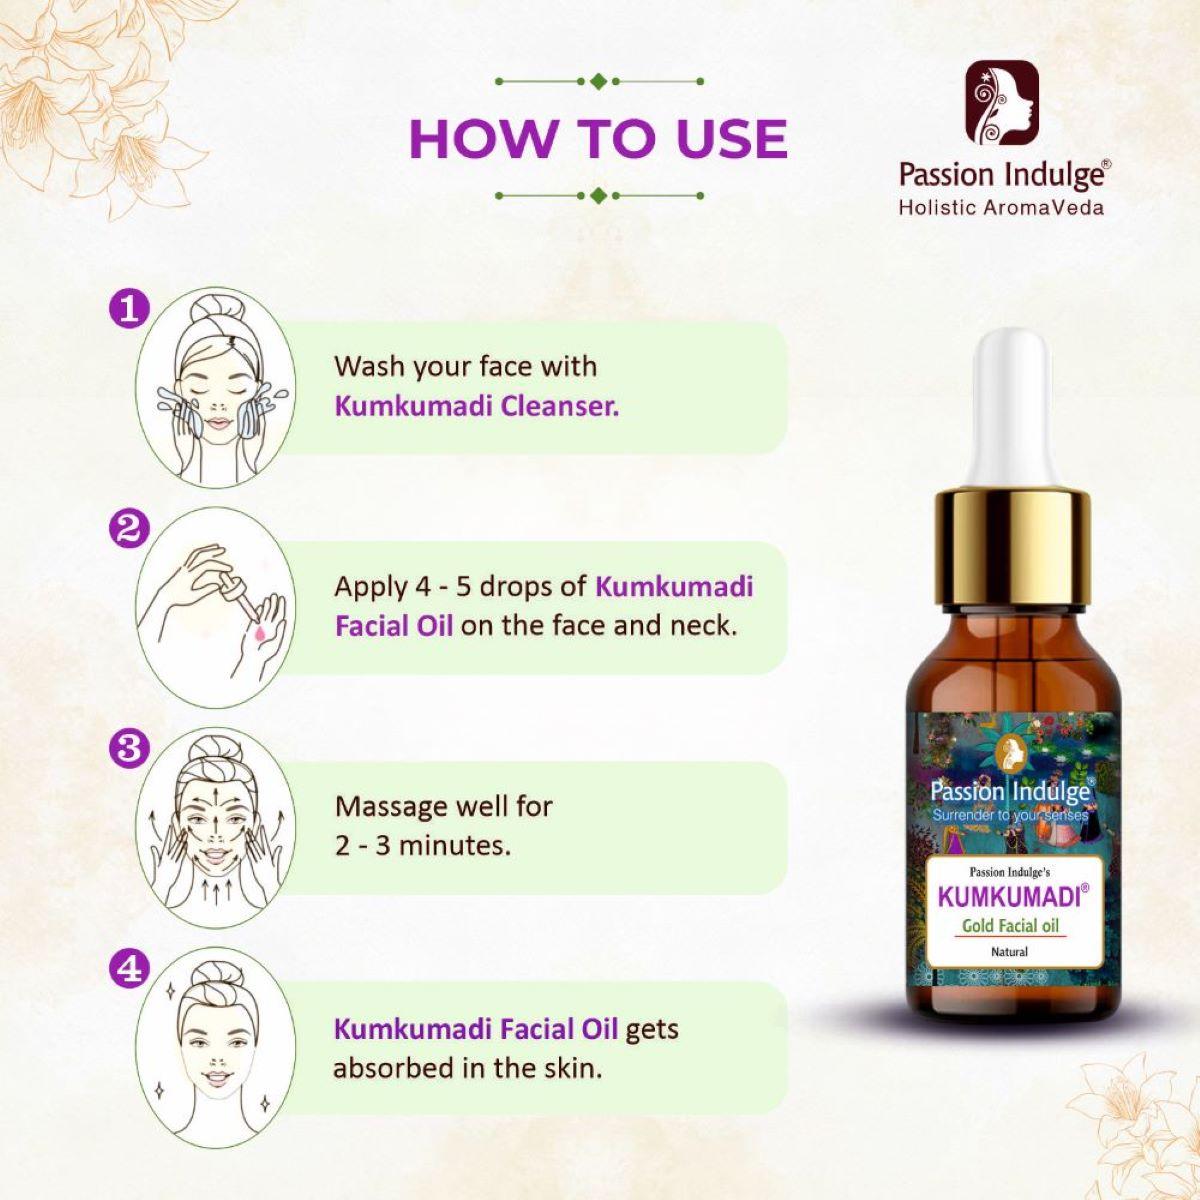 Kumkumadi Pure & Natural Miracle Facial Oil 10ml For Glowing Skin with Saffron, Vetiver & 16 Herbs | Shine & Brightness | Anti Ageing | Anti Wrinkle | Reduces Dark Spots & Pigmentation for all Skin Type - passionindulge